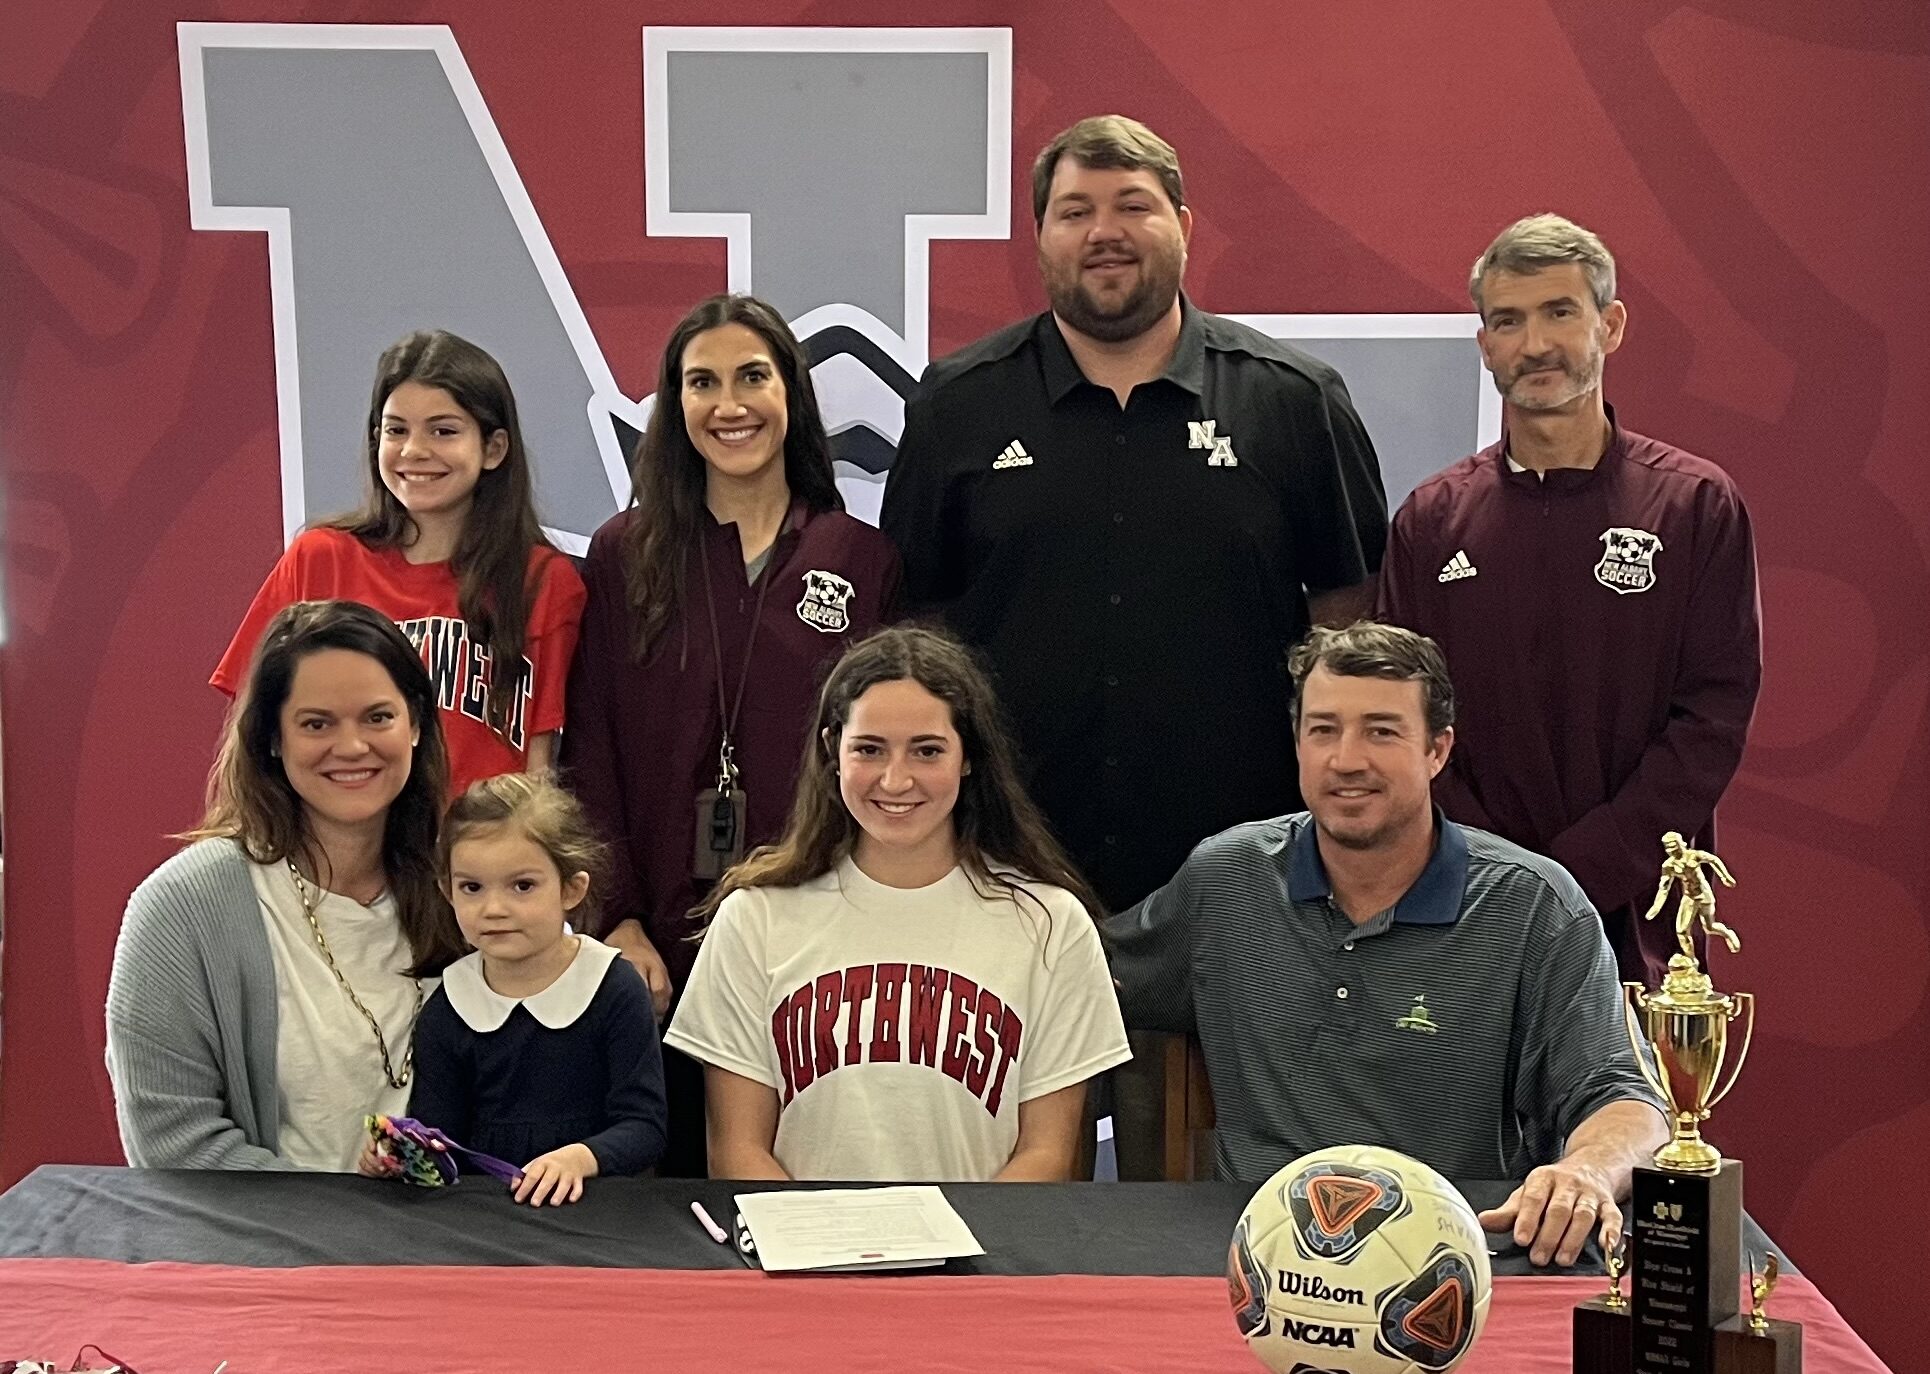 New Albany Lady Bulldog Soccer Player Caroline King (front center) is surrounded by family and coaches as she signs to play soccer for Northwest Mississippi Community College on Thursday, February 17. Pictured front row l-r:  Bailey King, Elizabeth King, Caroline King, Geoffrey KingBack row l-r:  Sara Jane King; Katelyn Robbins, NAHS Assistant Soccer Coach; Cody Stubblefield, NAHS Athletic Director; Bert Anderson, NAHS Head Girls Soccer Coach.